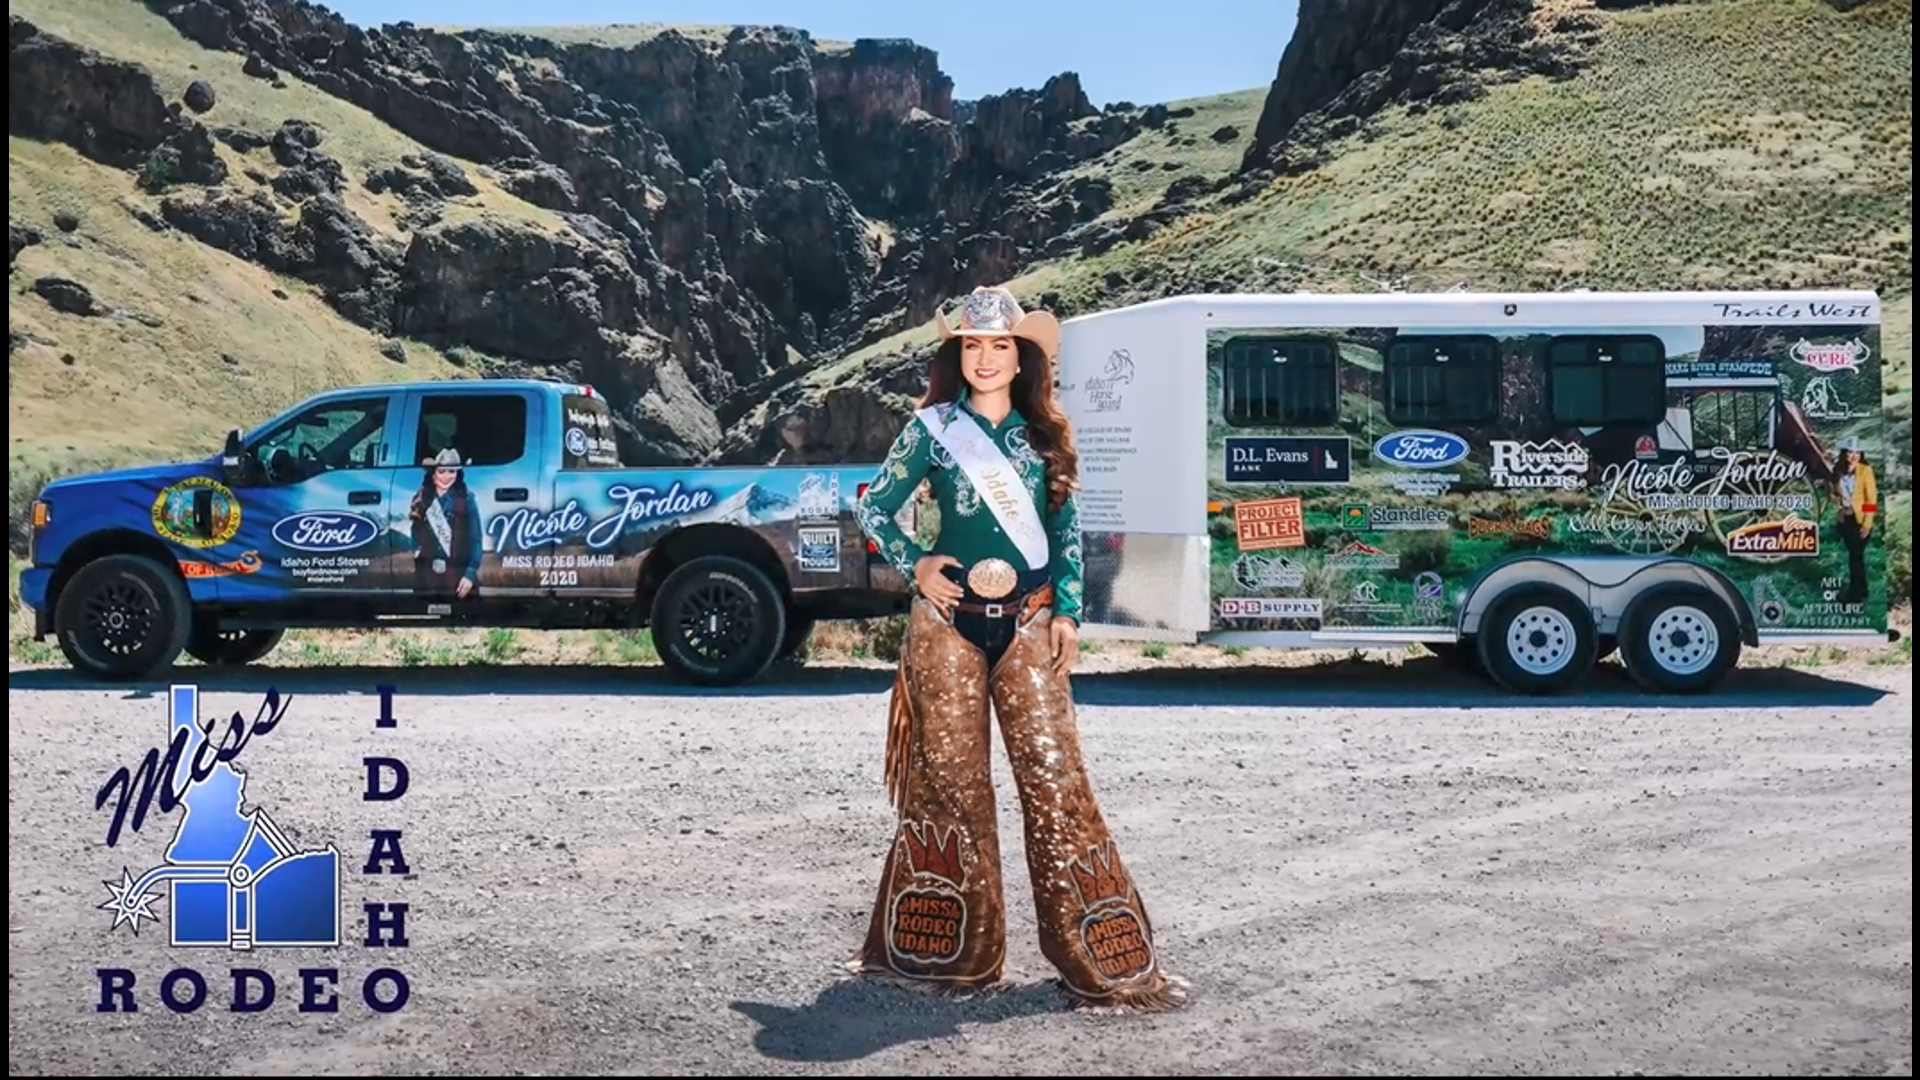 Miss Rodeo Idaho, Nicole Jordan explains what the Miss Rodeo Idaho pageant is and how she felt winning the title.